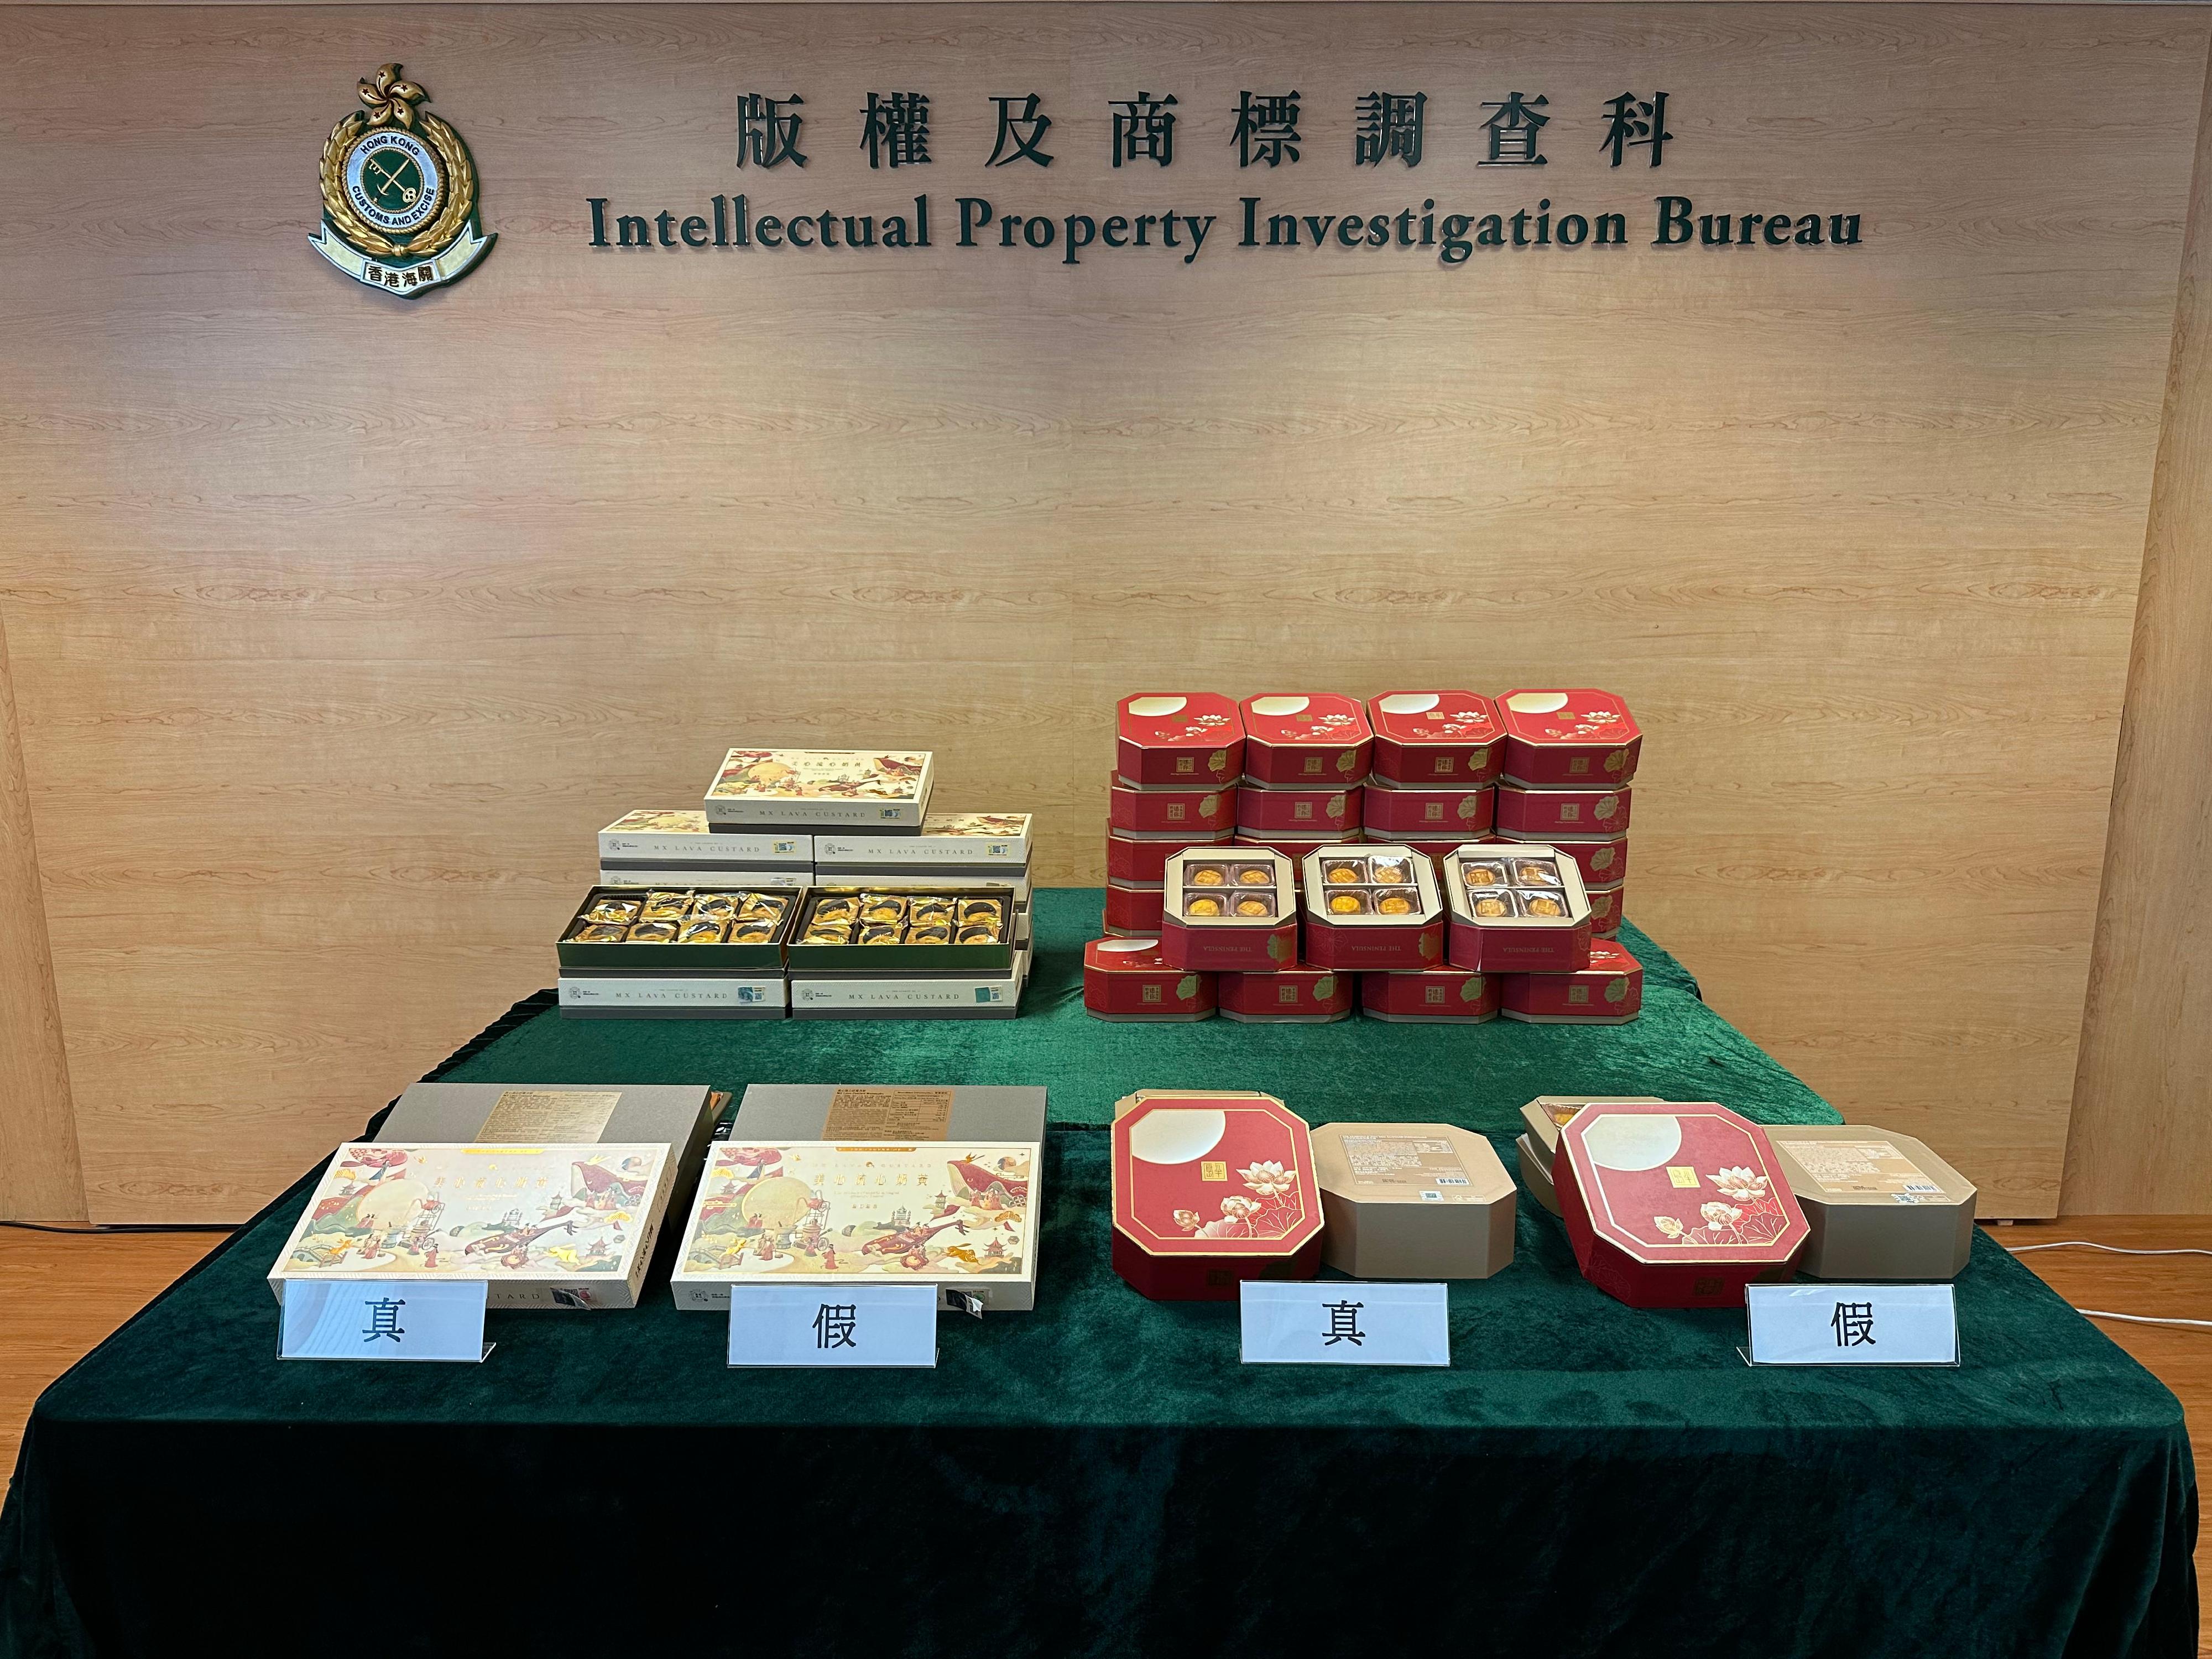 Hong Kong Customs has mounted a special operation since September 14 to combat the online sale of counterfeit mooncakes. A total of 49 boxes of suspected counterfeit mooncakes, with a total estimated market value of about $16,000, have been seized as of today (September 20). Photo shows some of the suspected counterfeit mooncakes seized, along with authentic mooncakes provided by trademark owners.